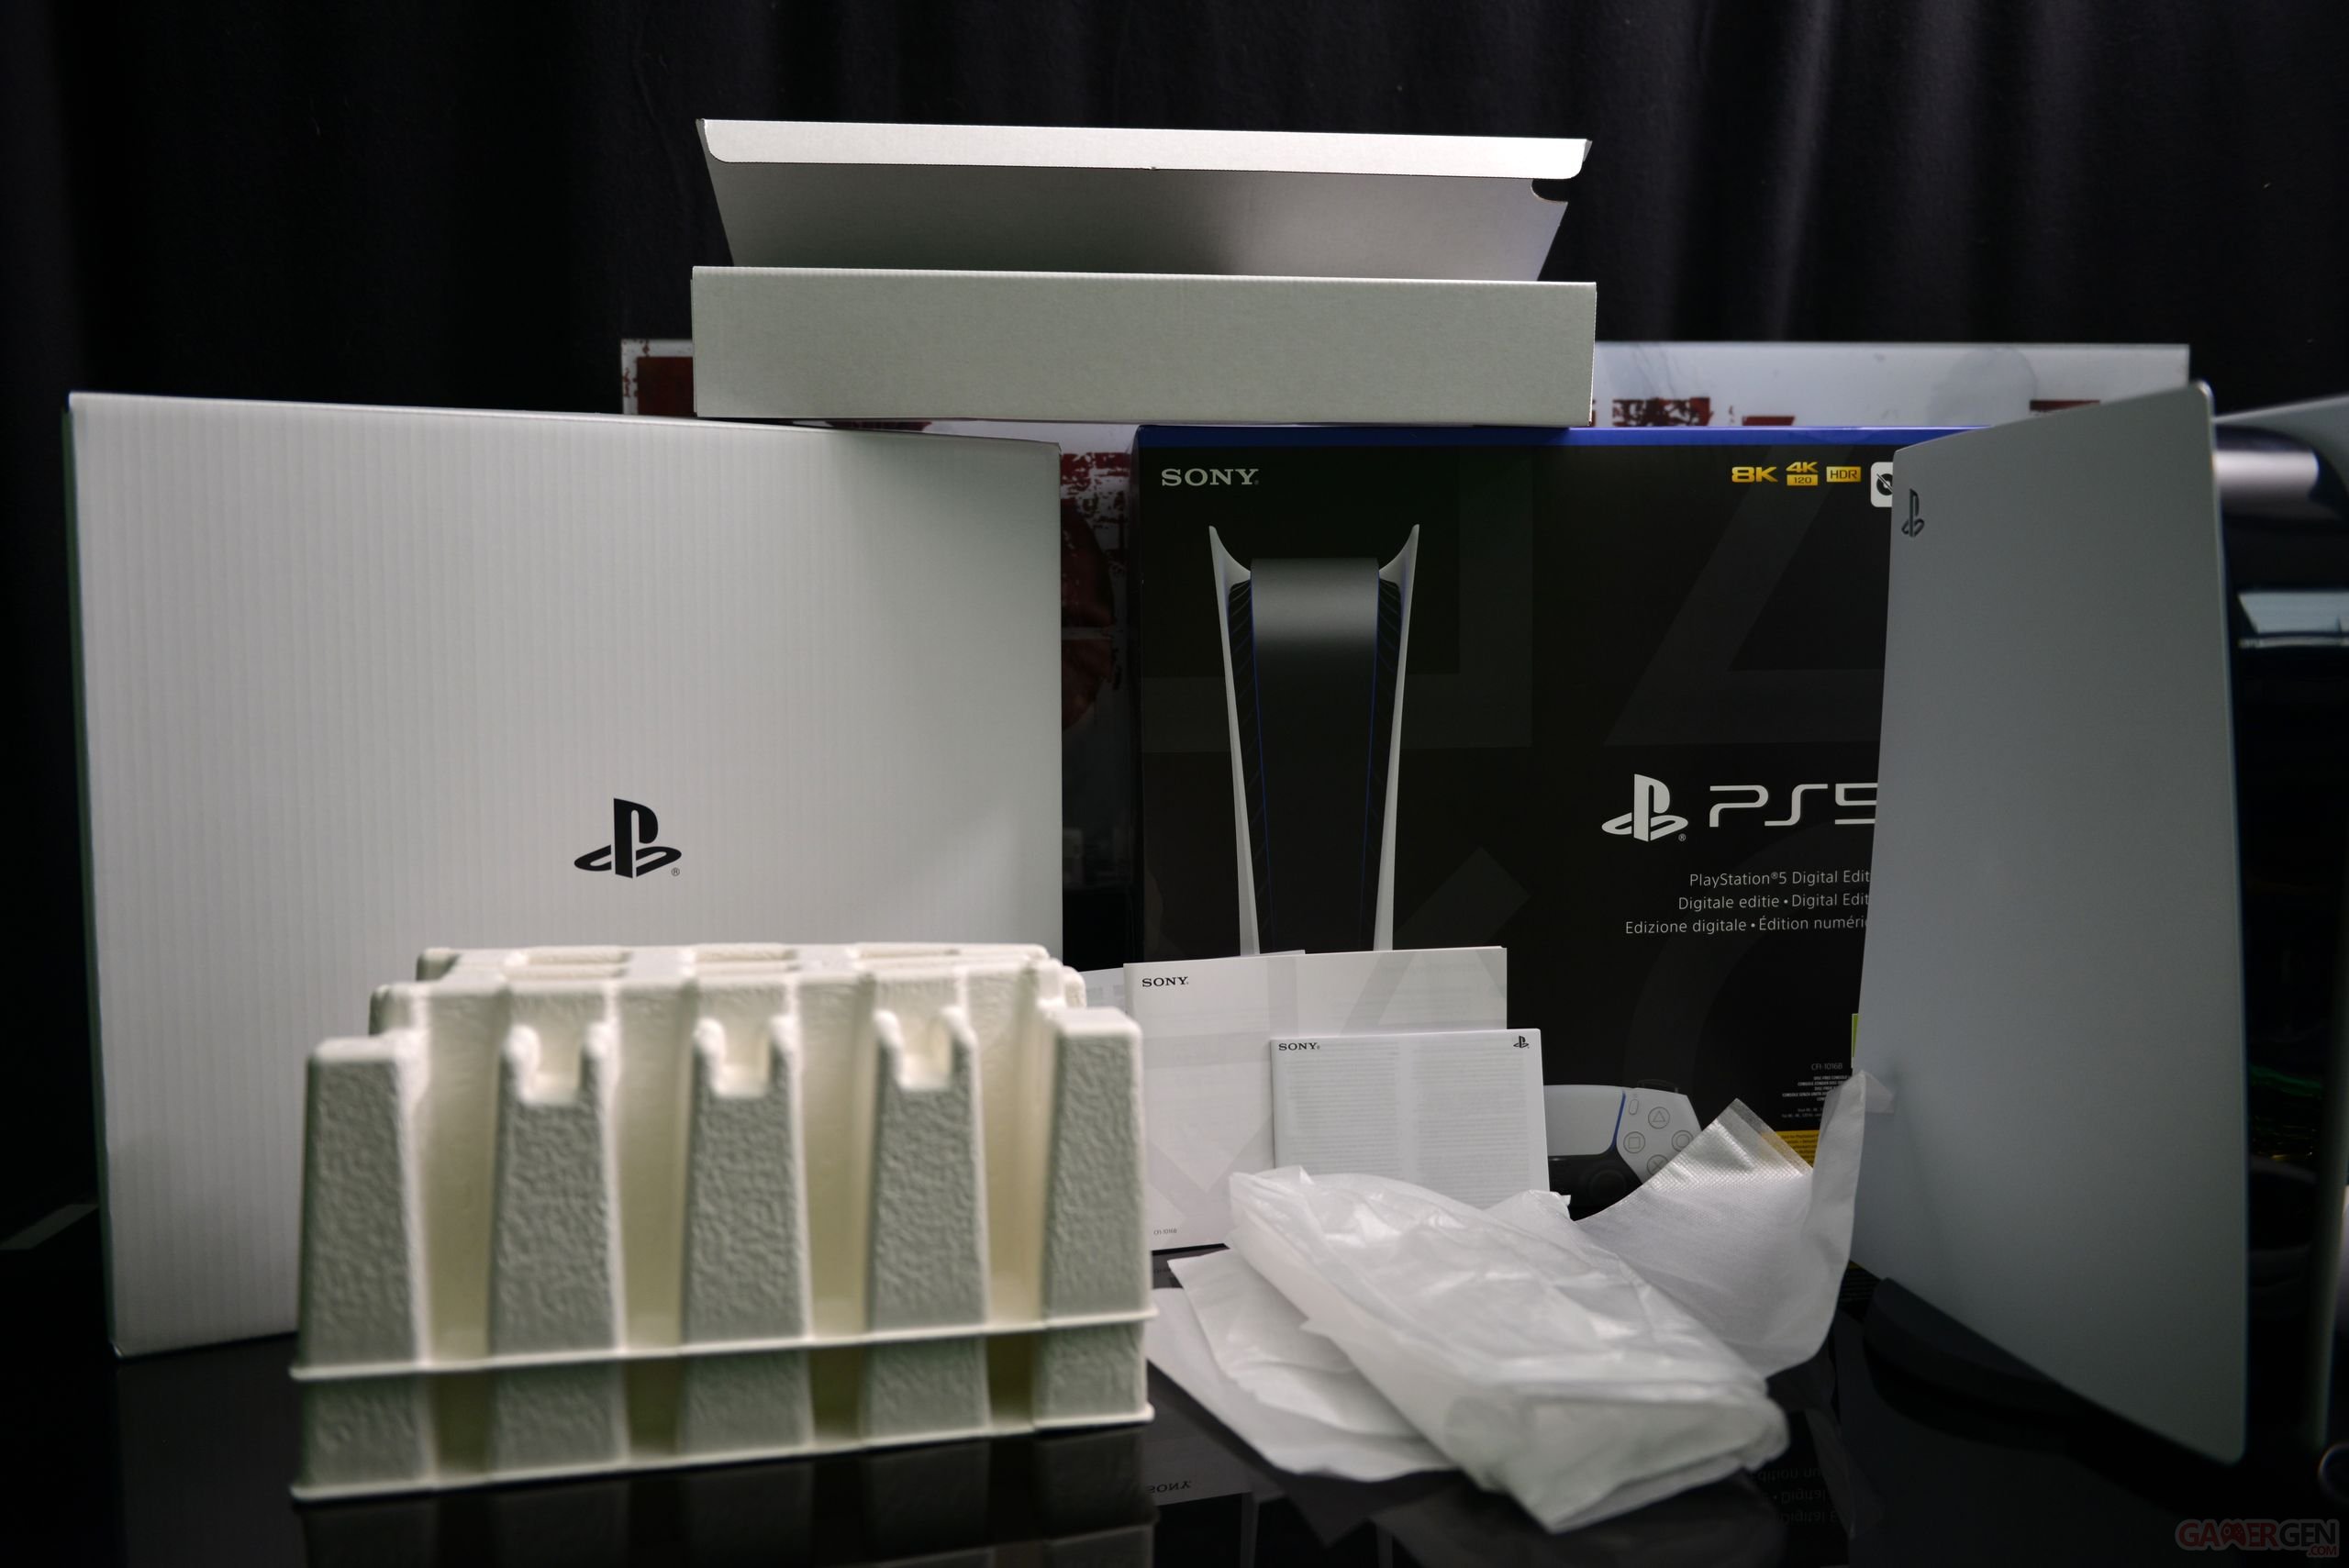 Unboxing the PS5: Everything in the box - The Tech Edvocate